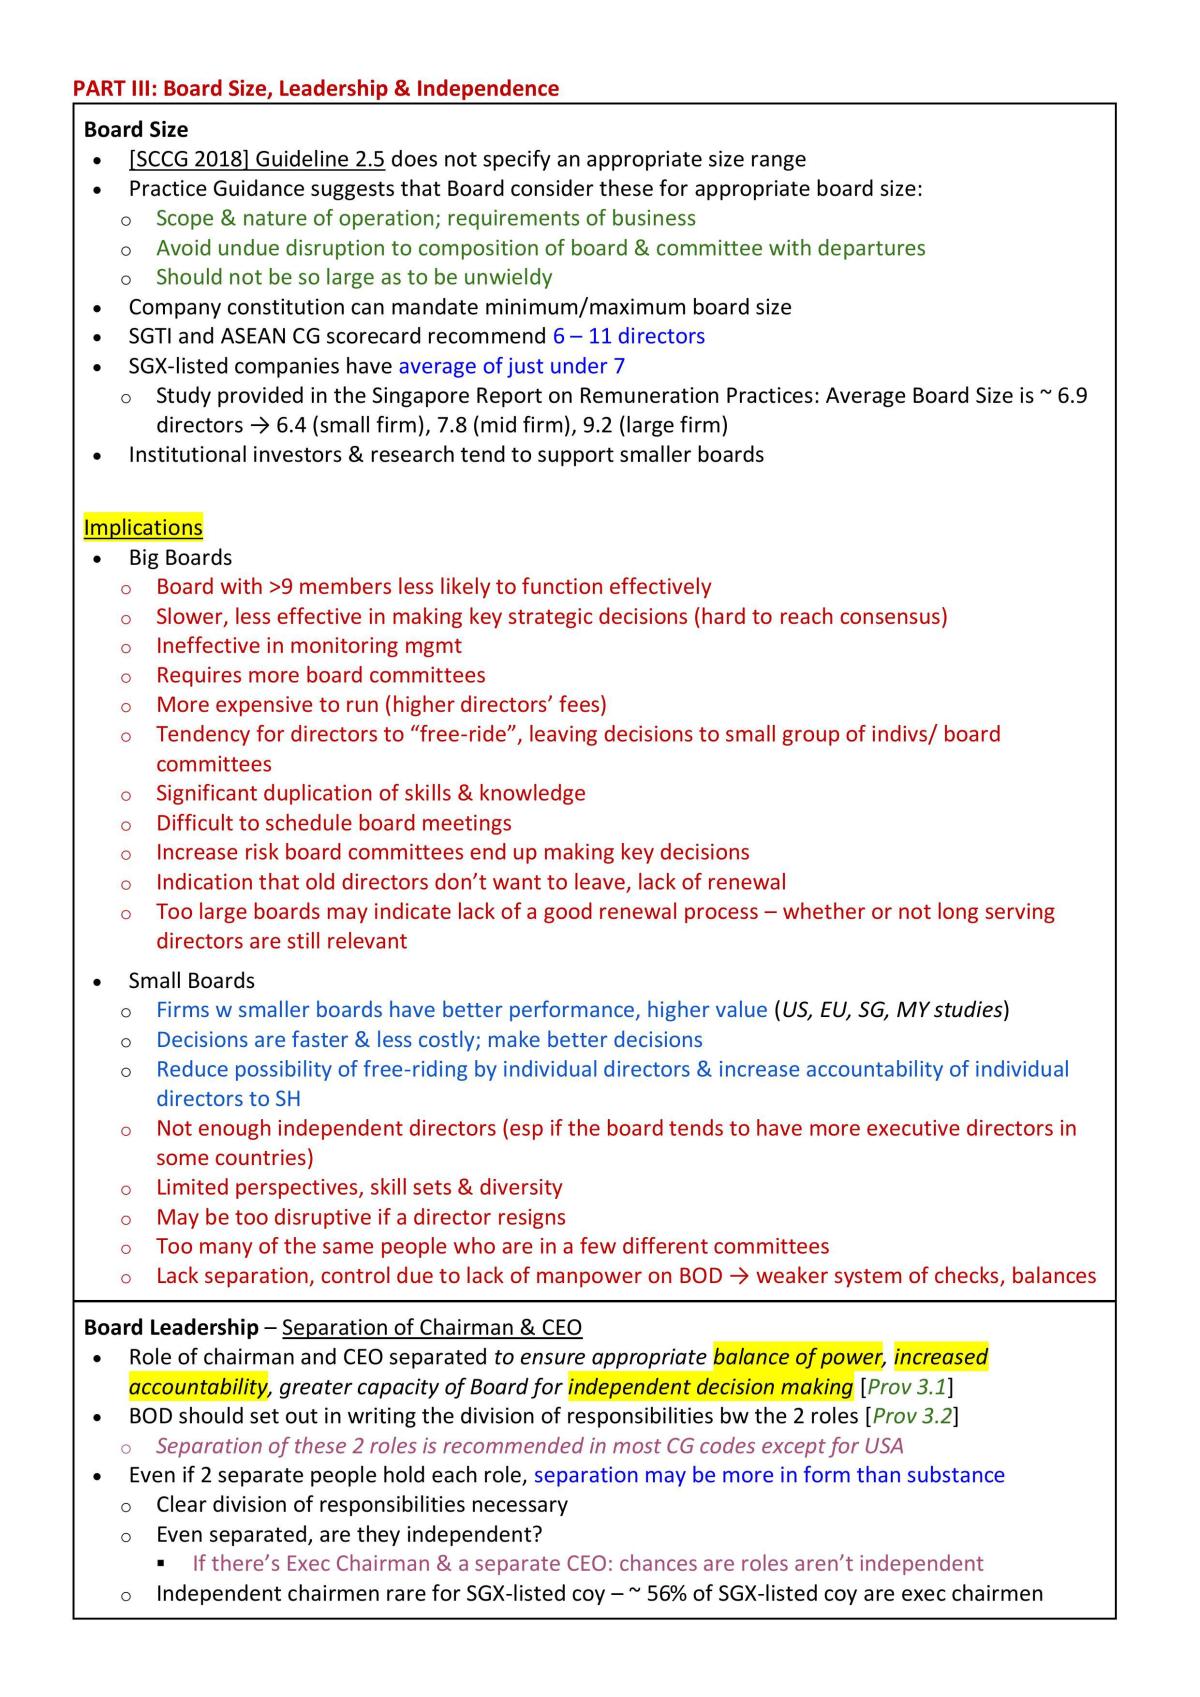 Consolidated Corporate Governance Notes - Page 18